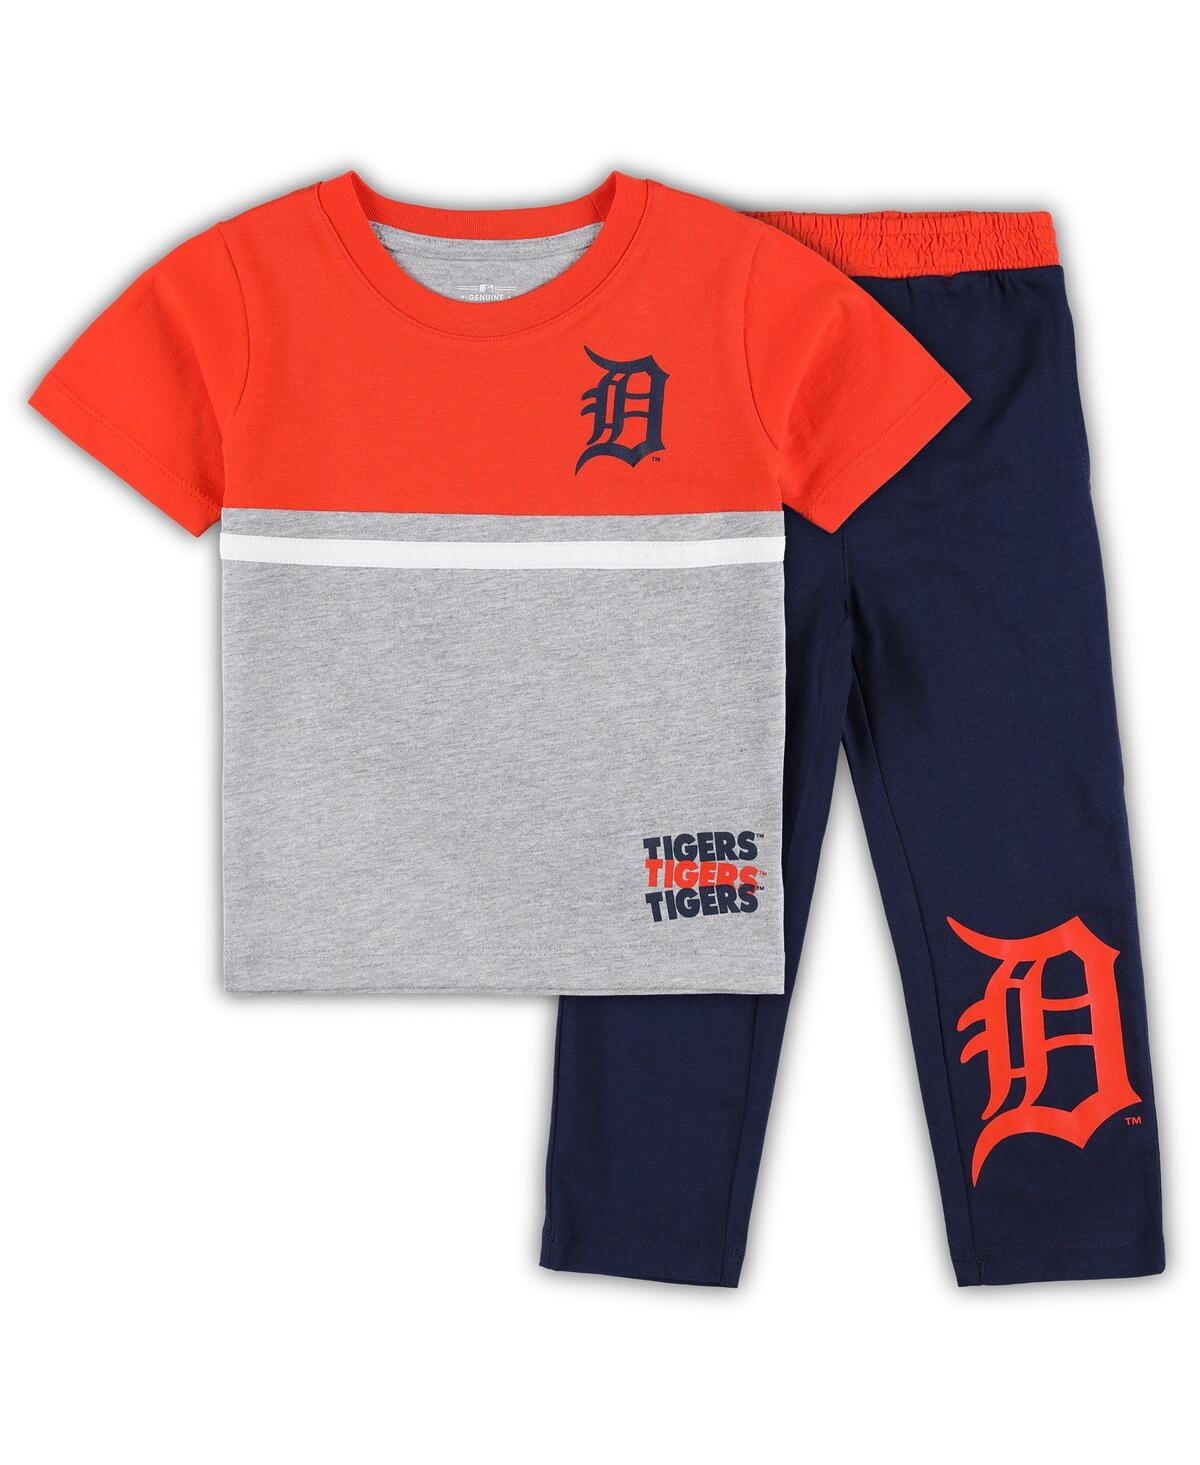 Outerstuff Babies' Toddler Boys And Girls Navy, Orange Detroit Tigers Batters Box T-shirt And Pants Set In Navy,orange